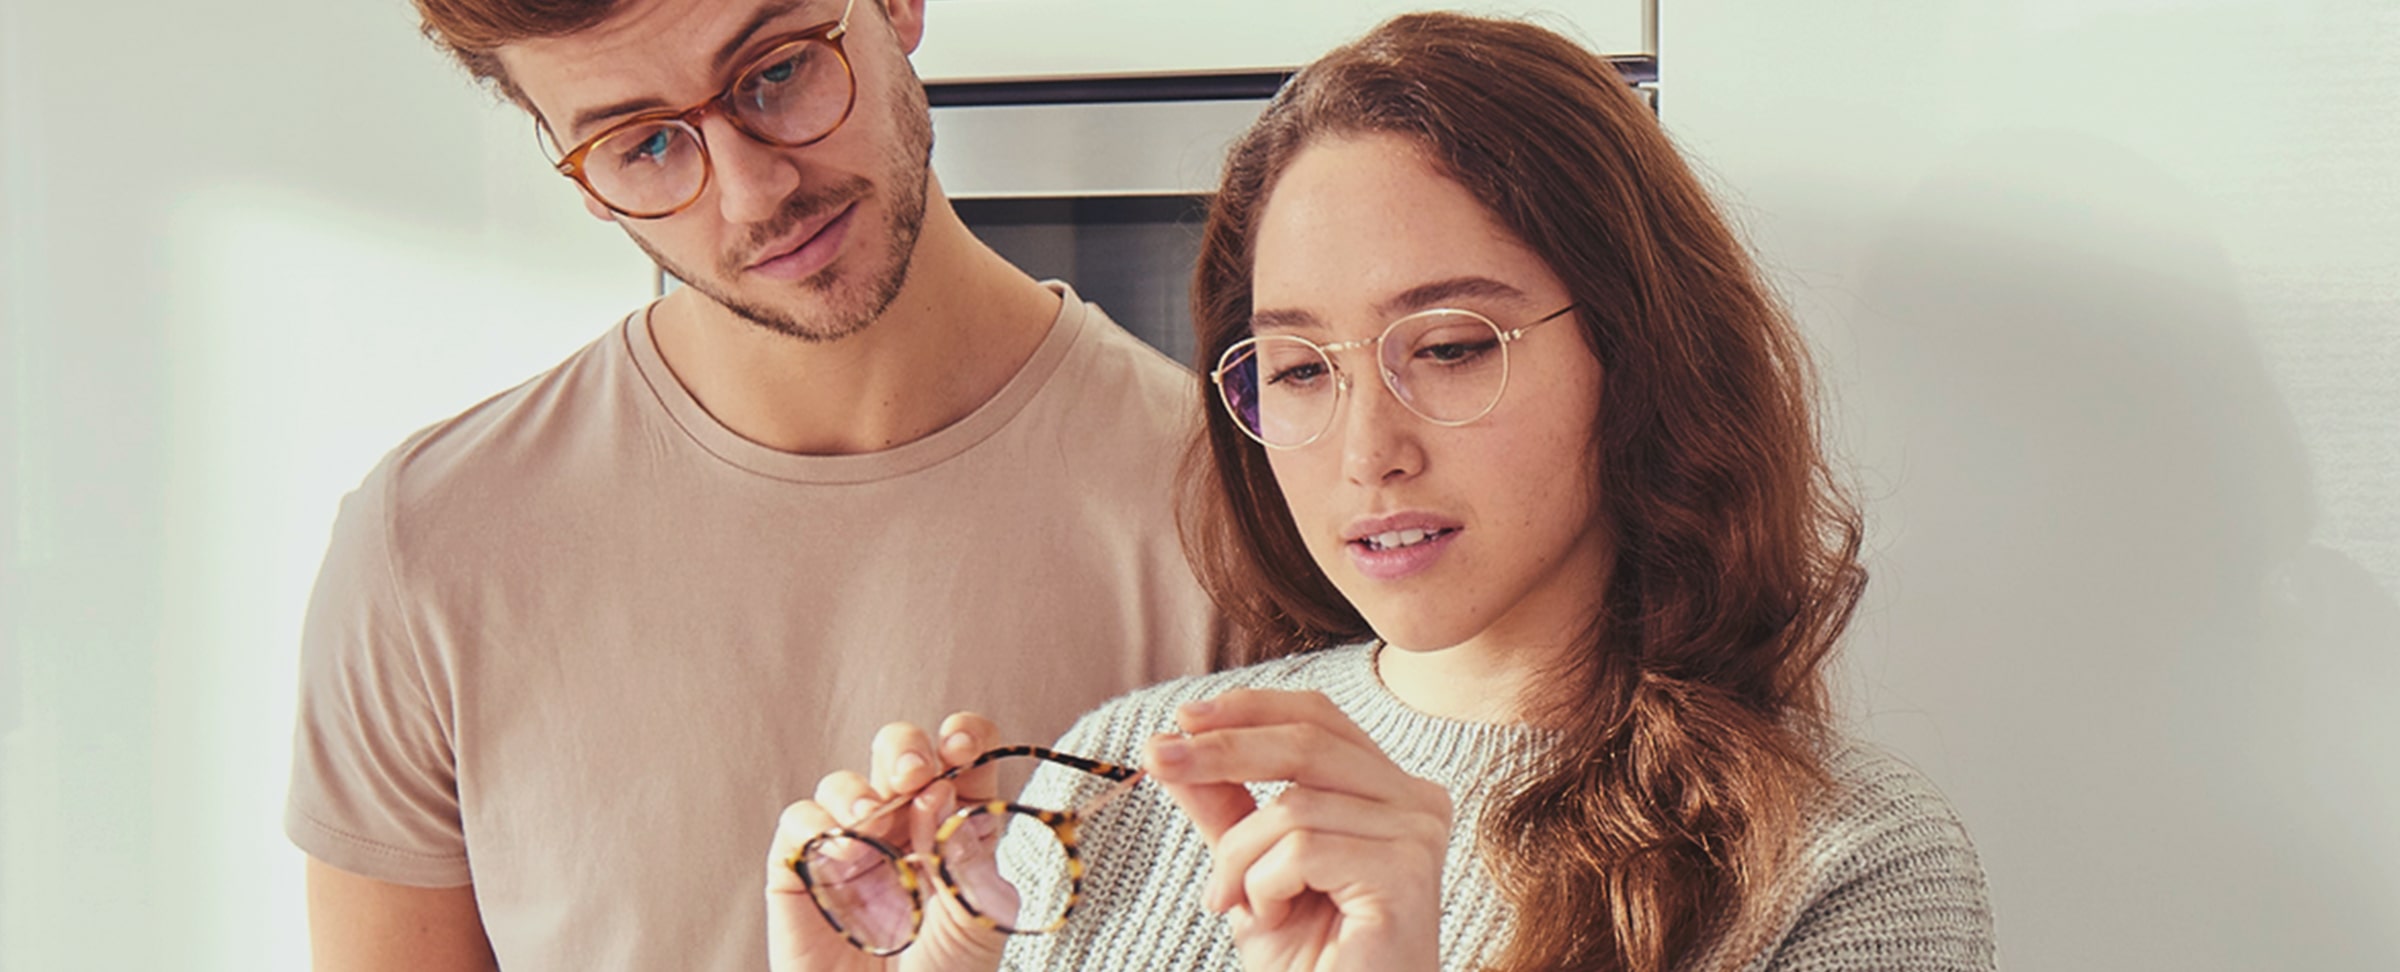 A young man and woman looking at a pair of glasses in their home